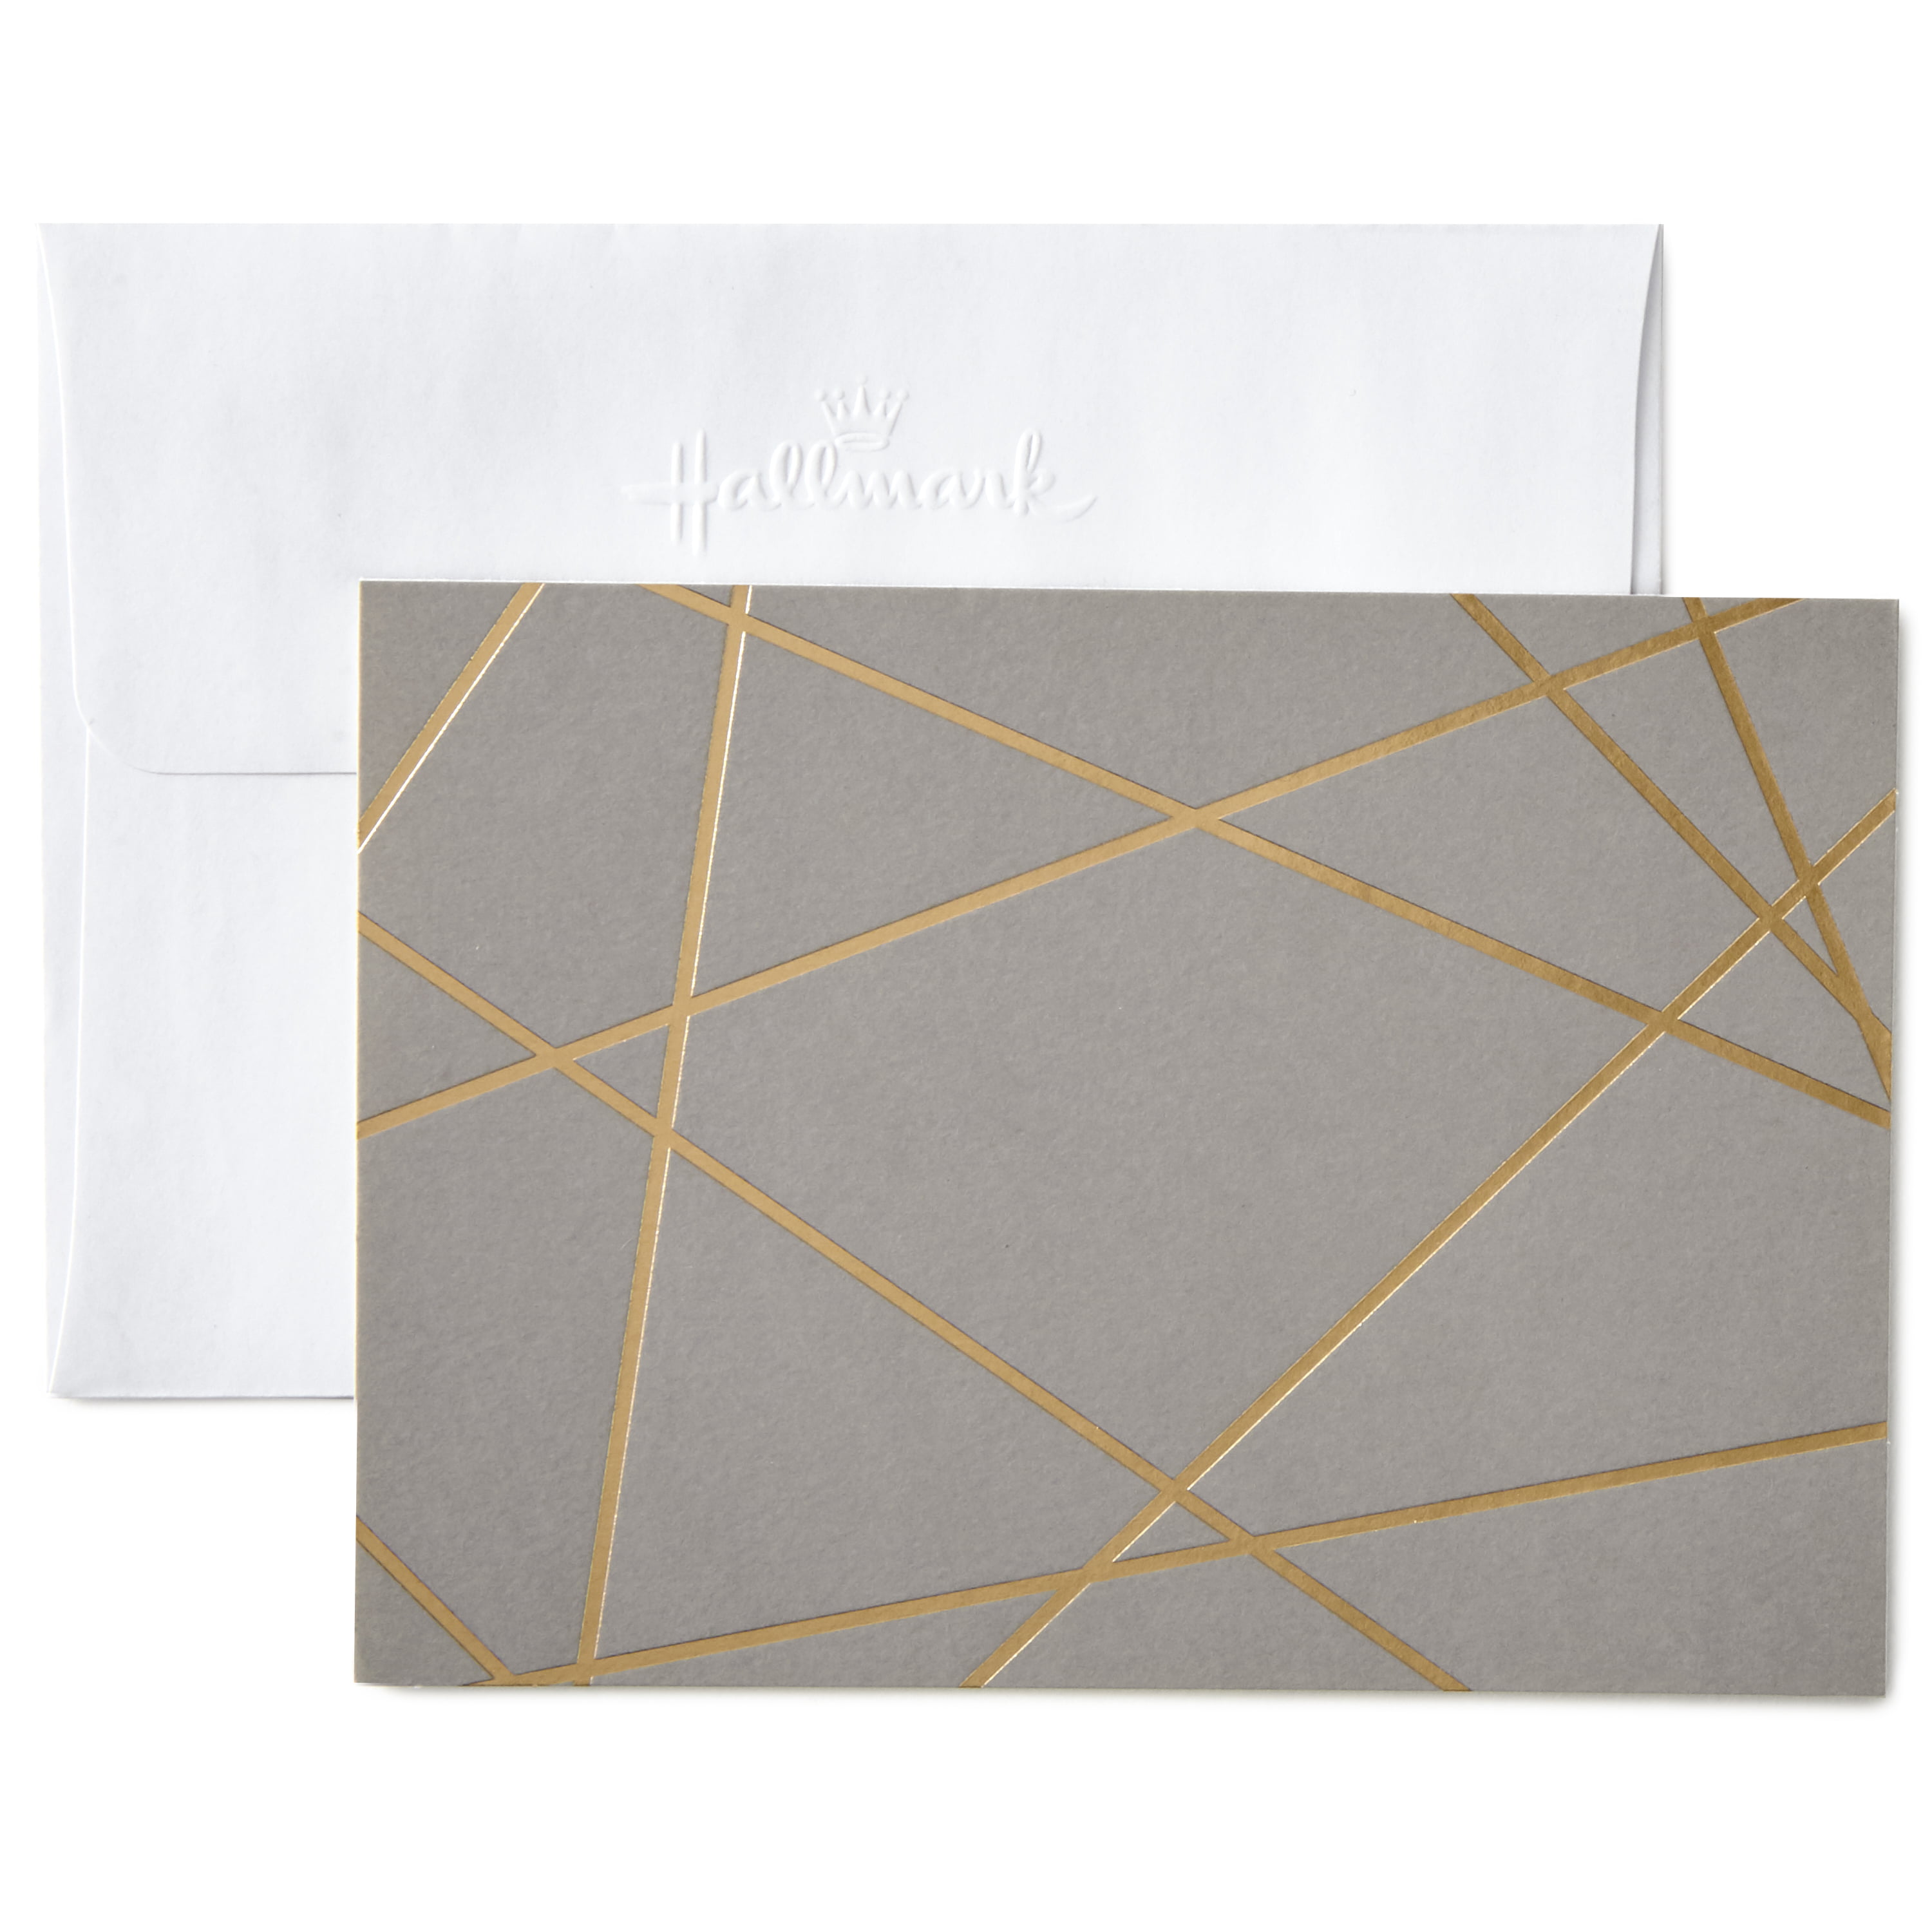 Bumblebee Hallmark Signature Gold Blank Cards 10 Cards with Envelopes